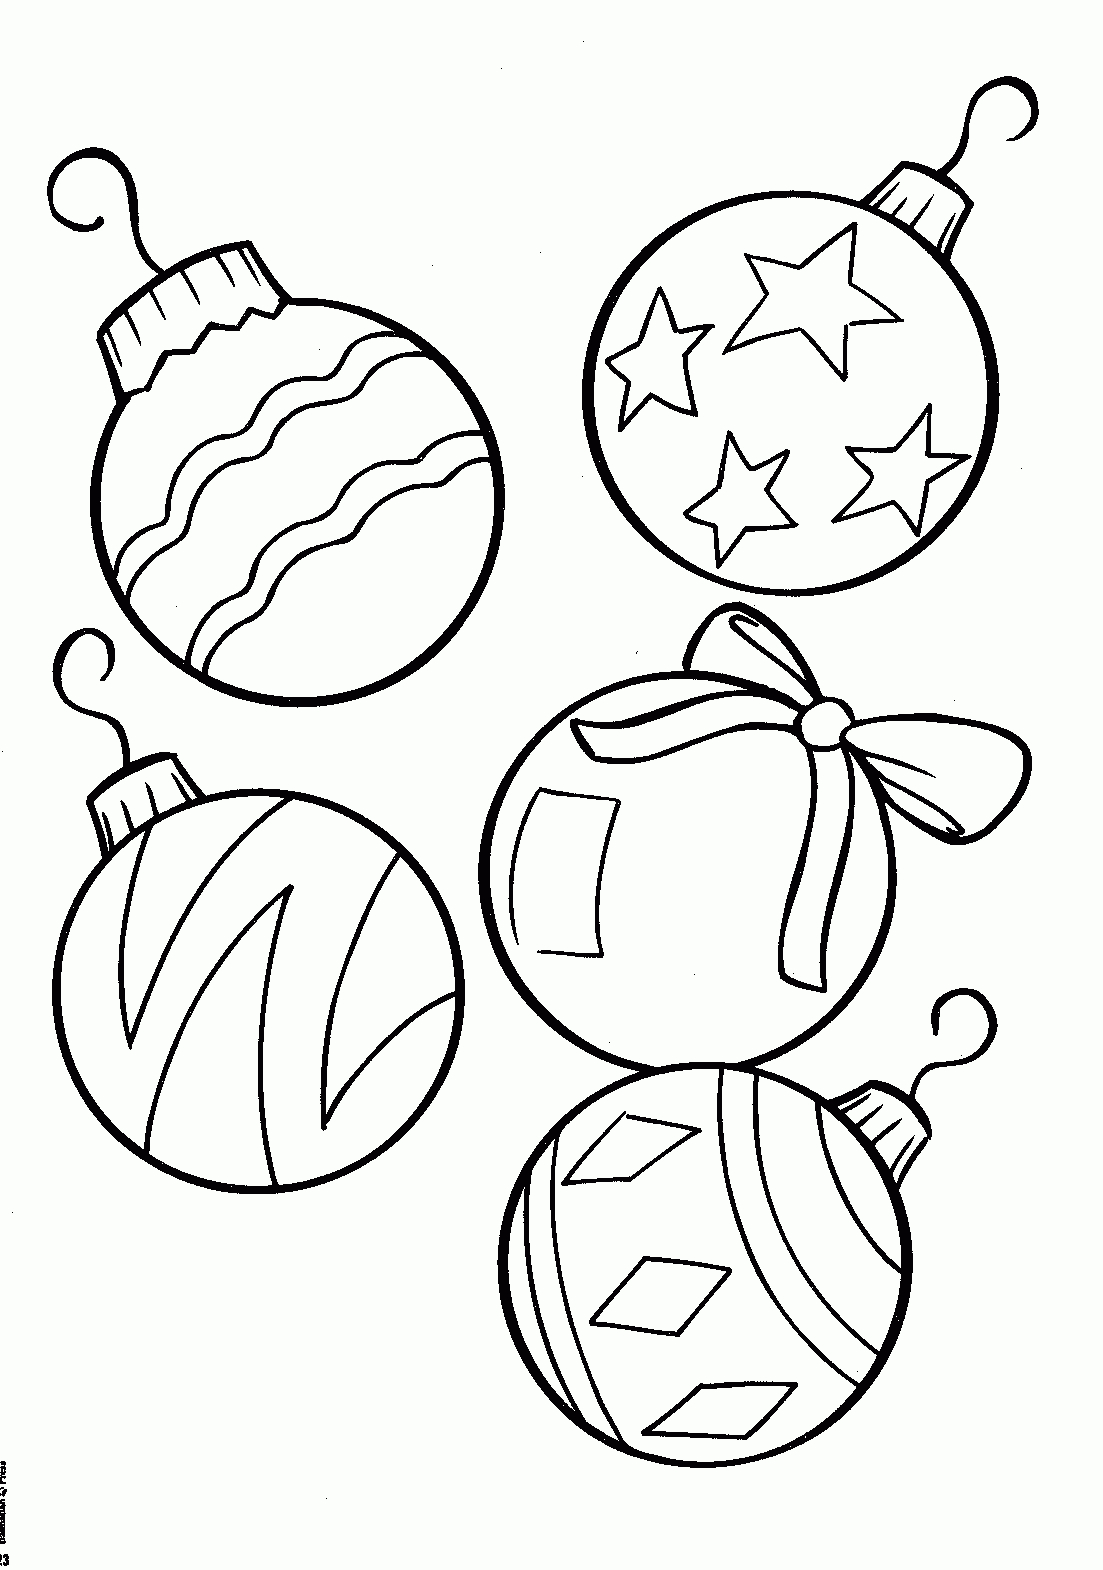 Ball Ornaments - Christmas Coloring Pages - Free Large Images - Free Printable Ornaments To Color